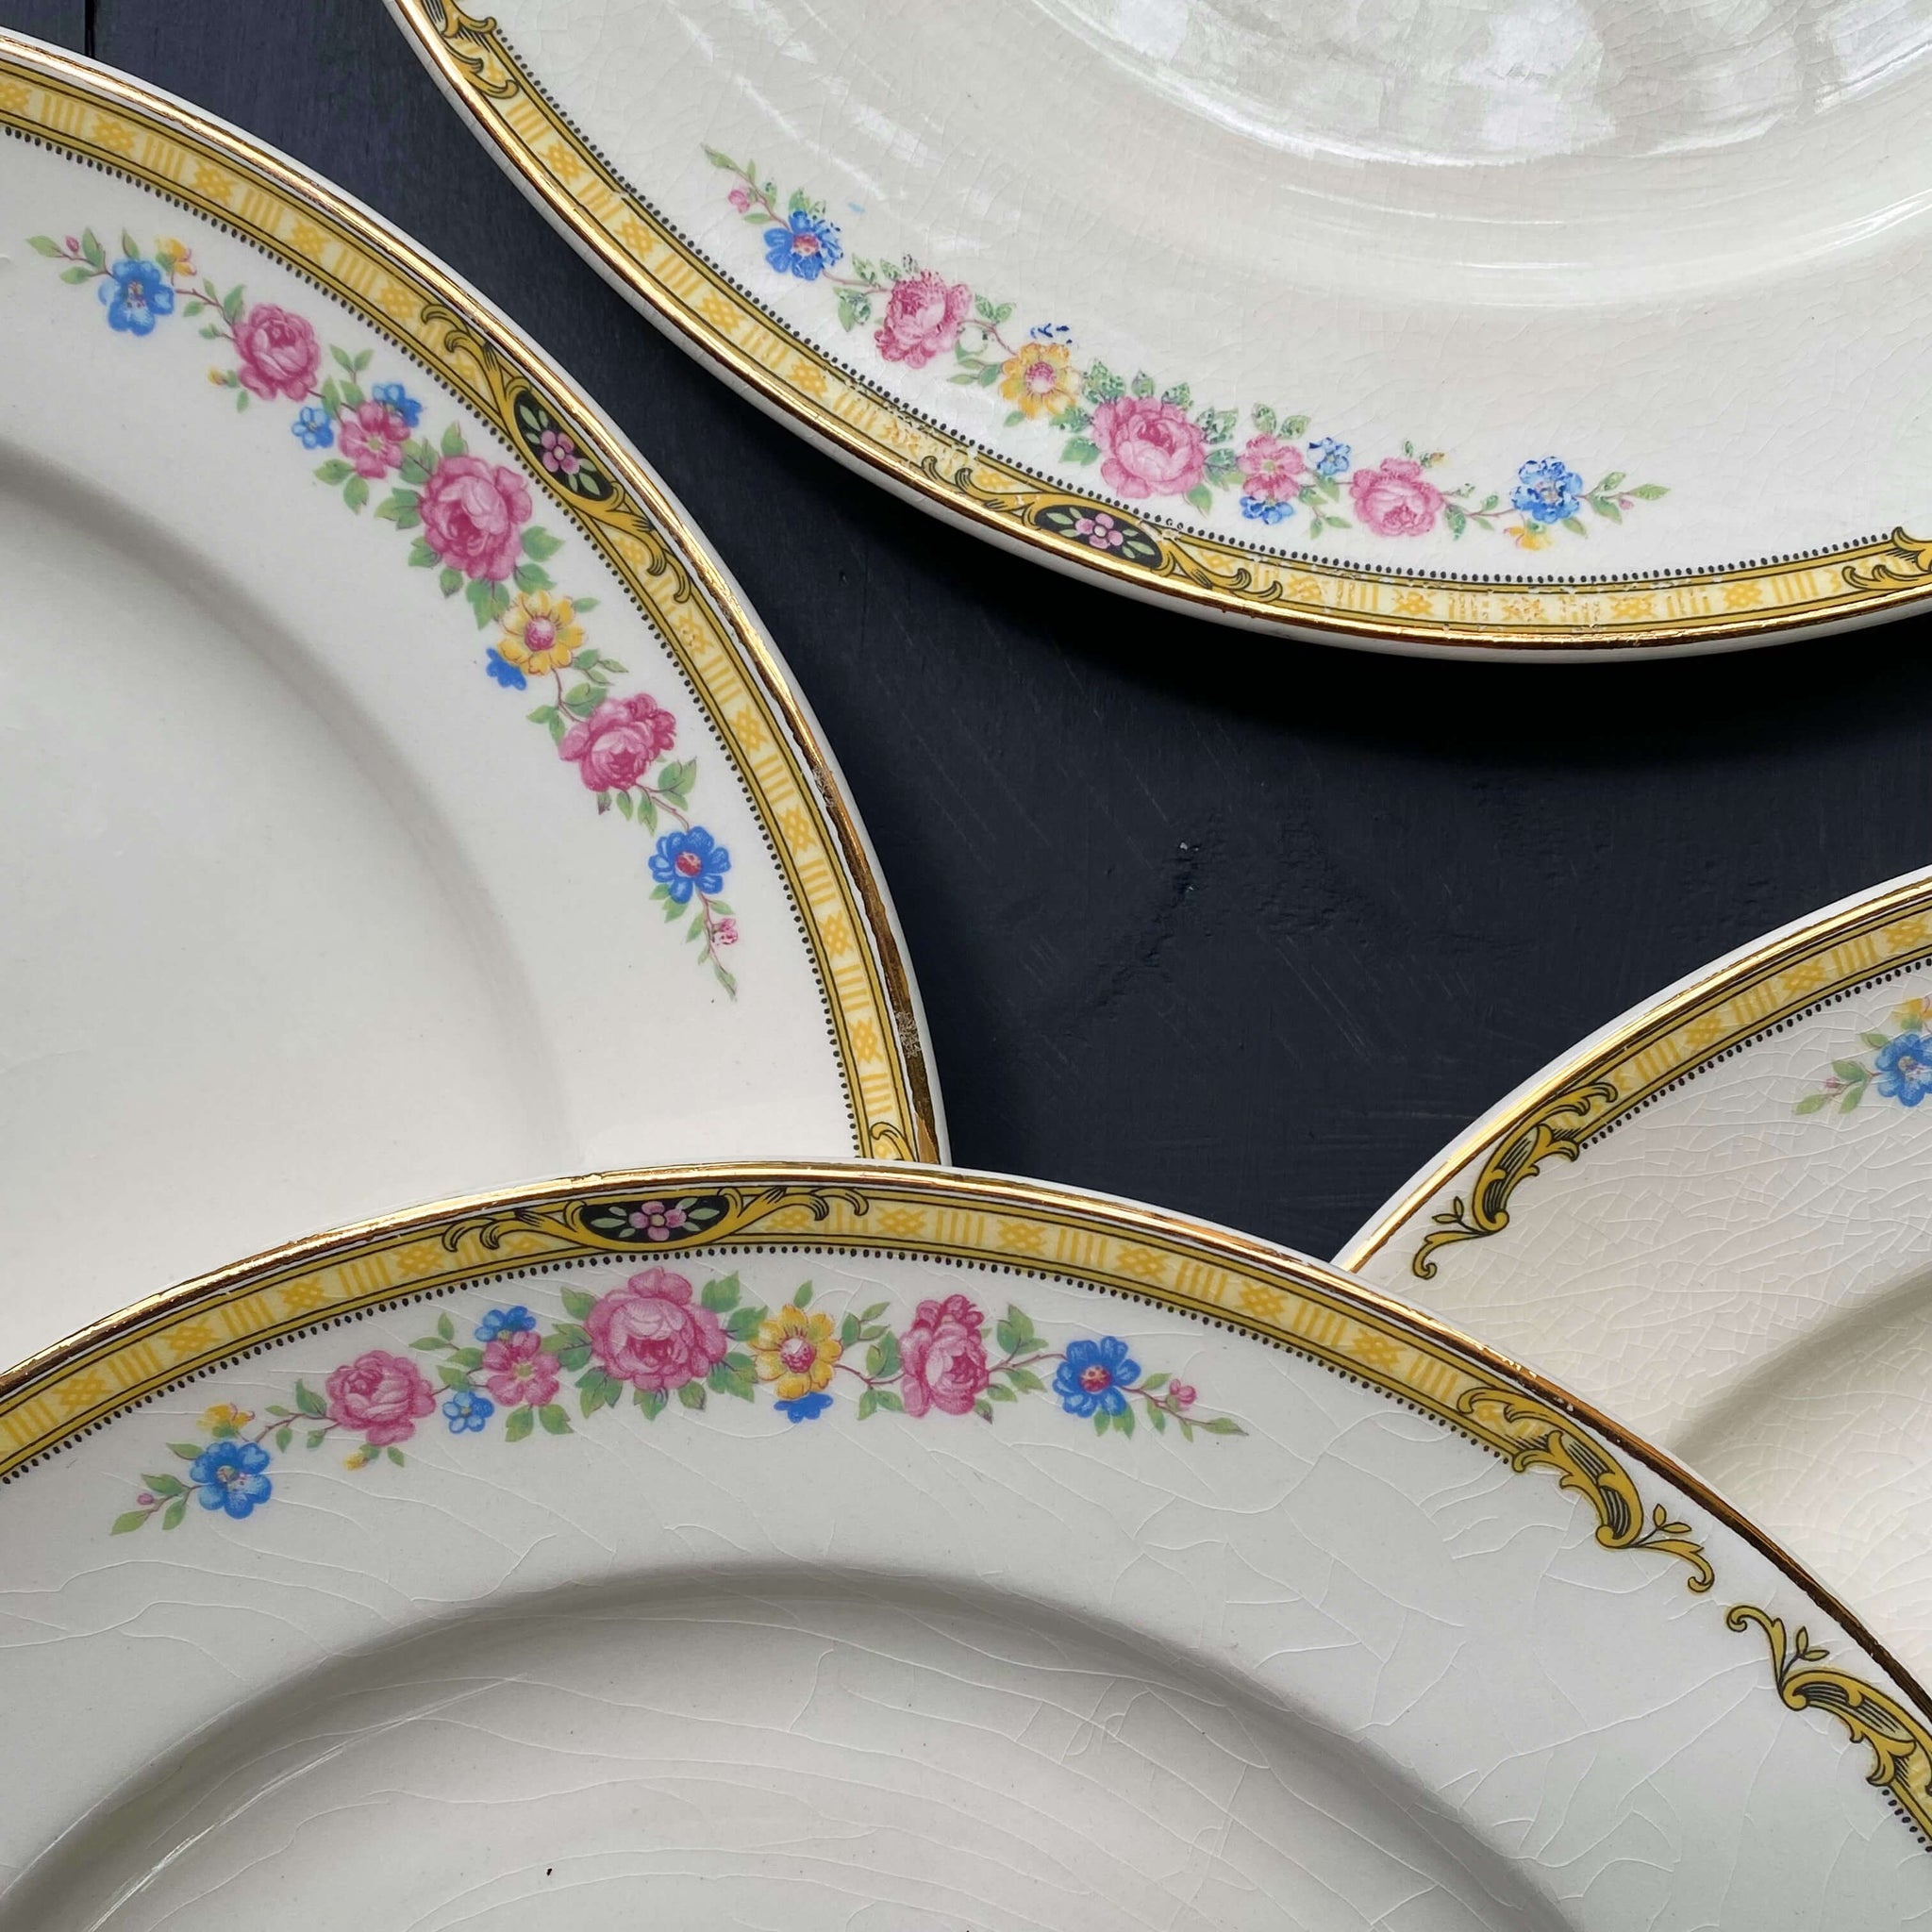 Vintage 1940s Edwin Knowles Dinner Plates with Yellow Band & Cottage Floralas - Set of 4 circa 1946